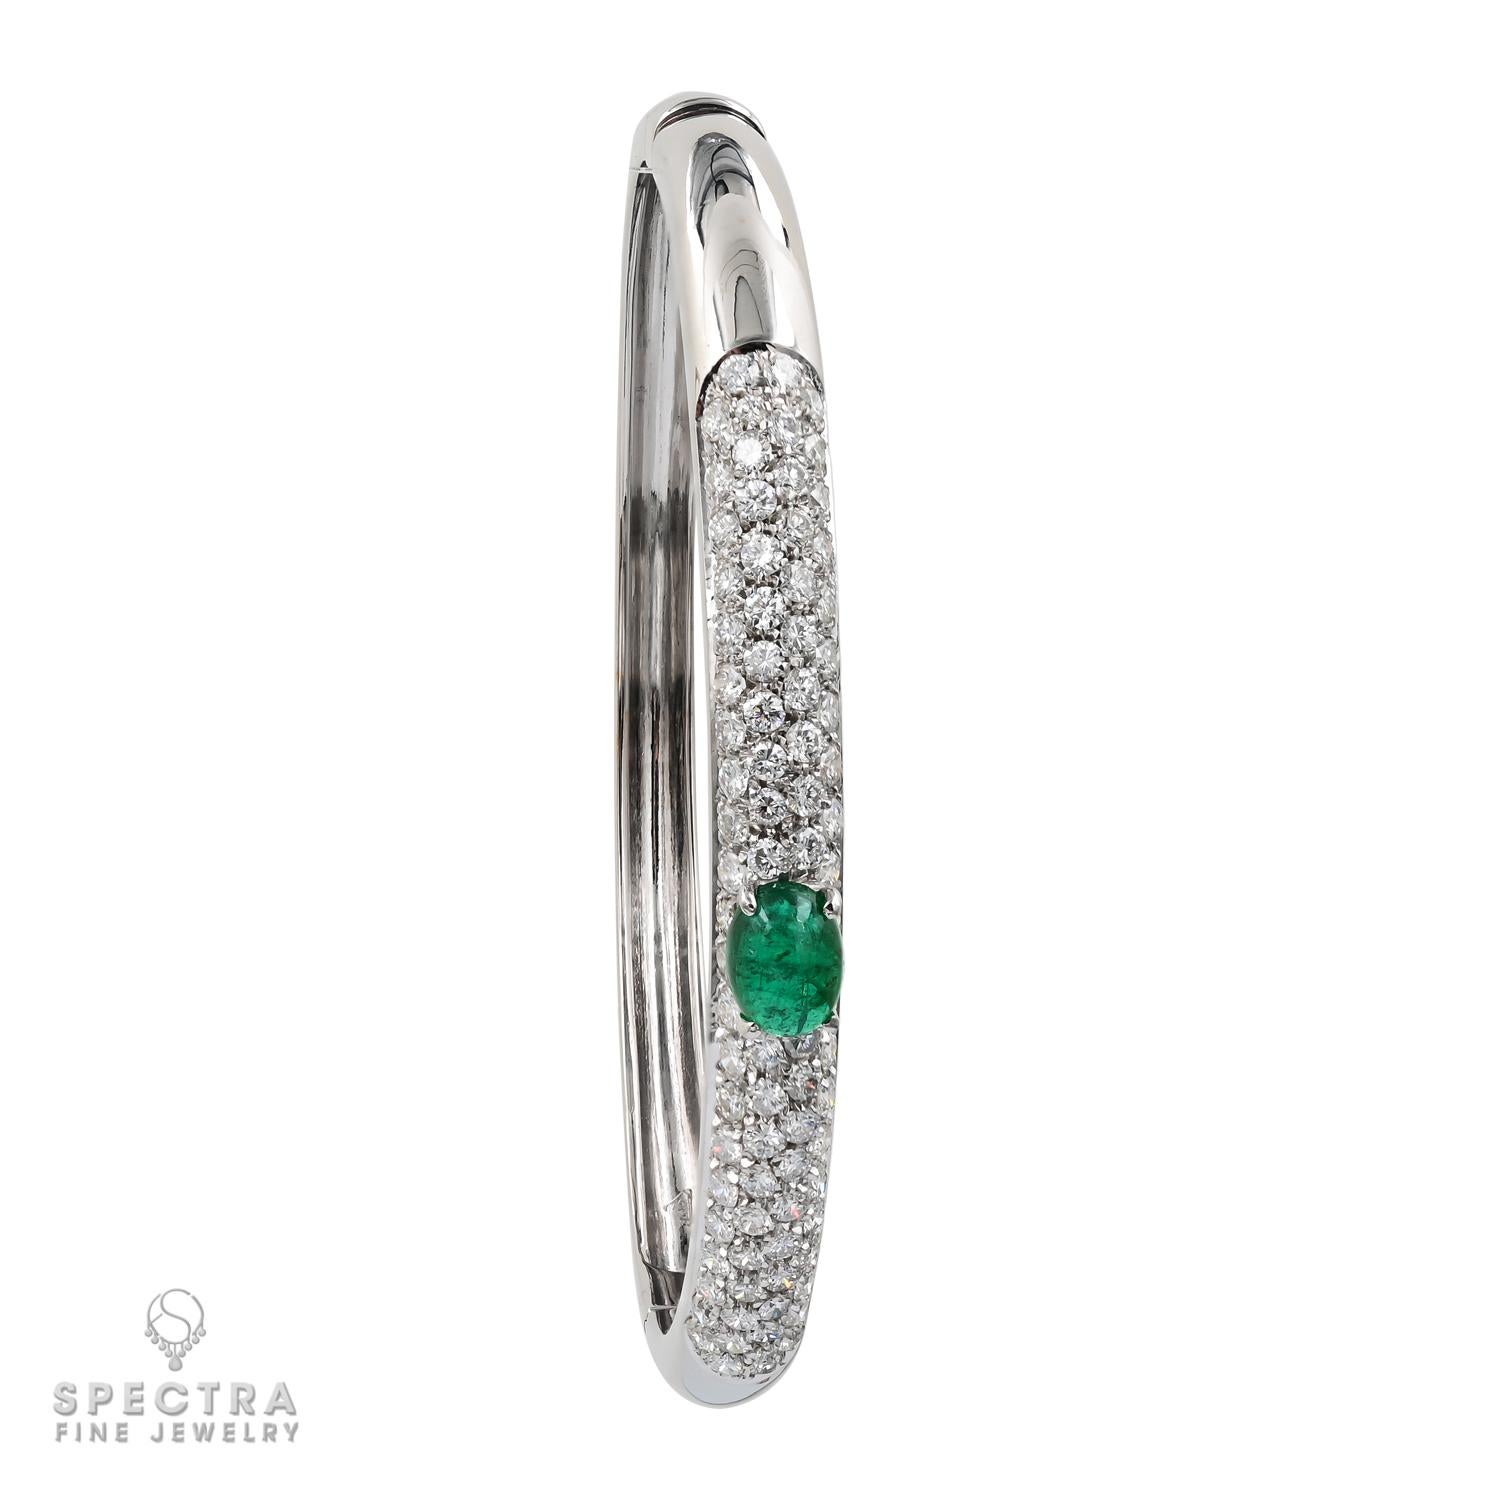 This Contemporary Oval Emerald Diamond Pavé Bombe Bangle Bracelet, made in the 21st century, is a classic hinge bangle in the bombé style. The domed shape is pleasingly rounded yet narrow. The curved surface allows the natural beauty of the diamonds